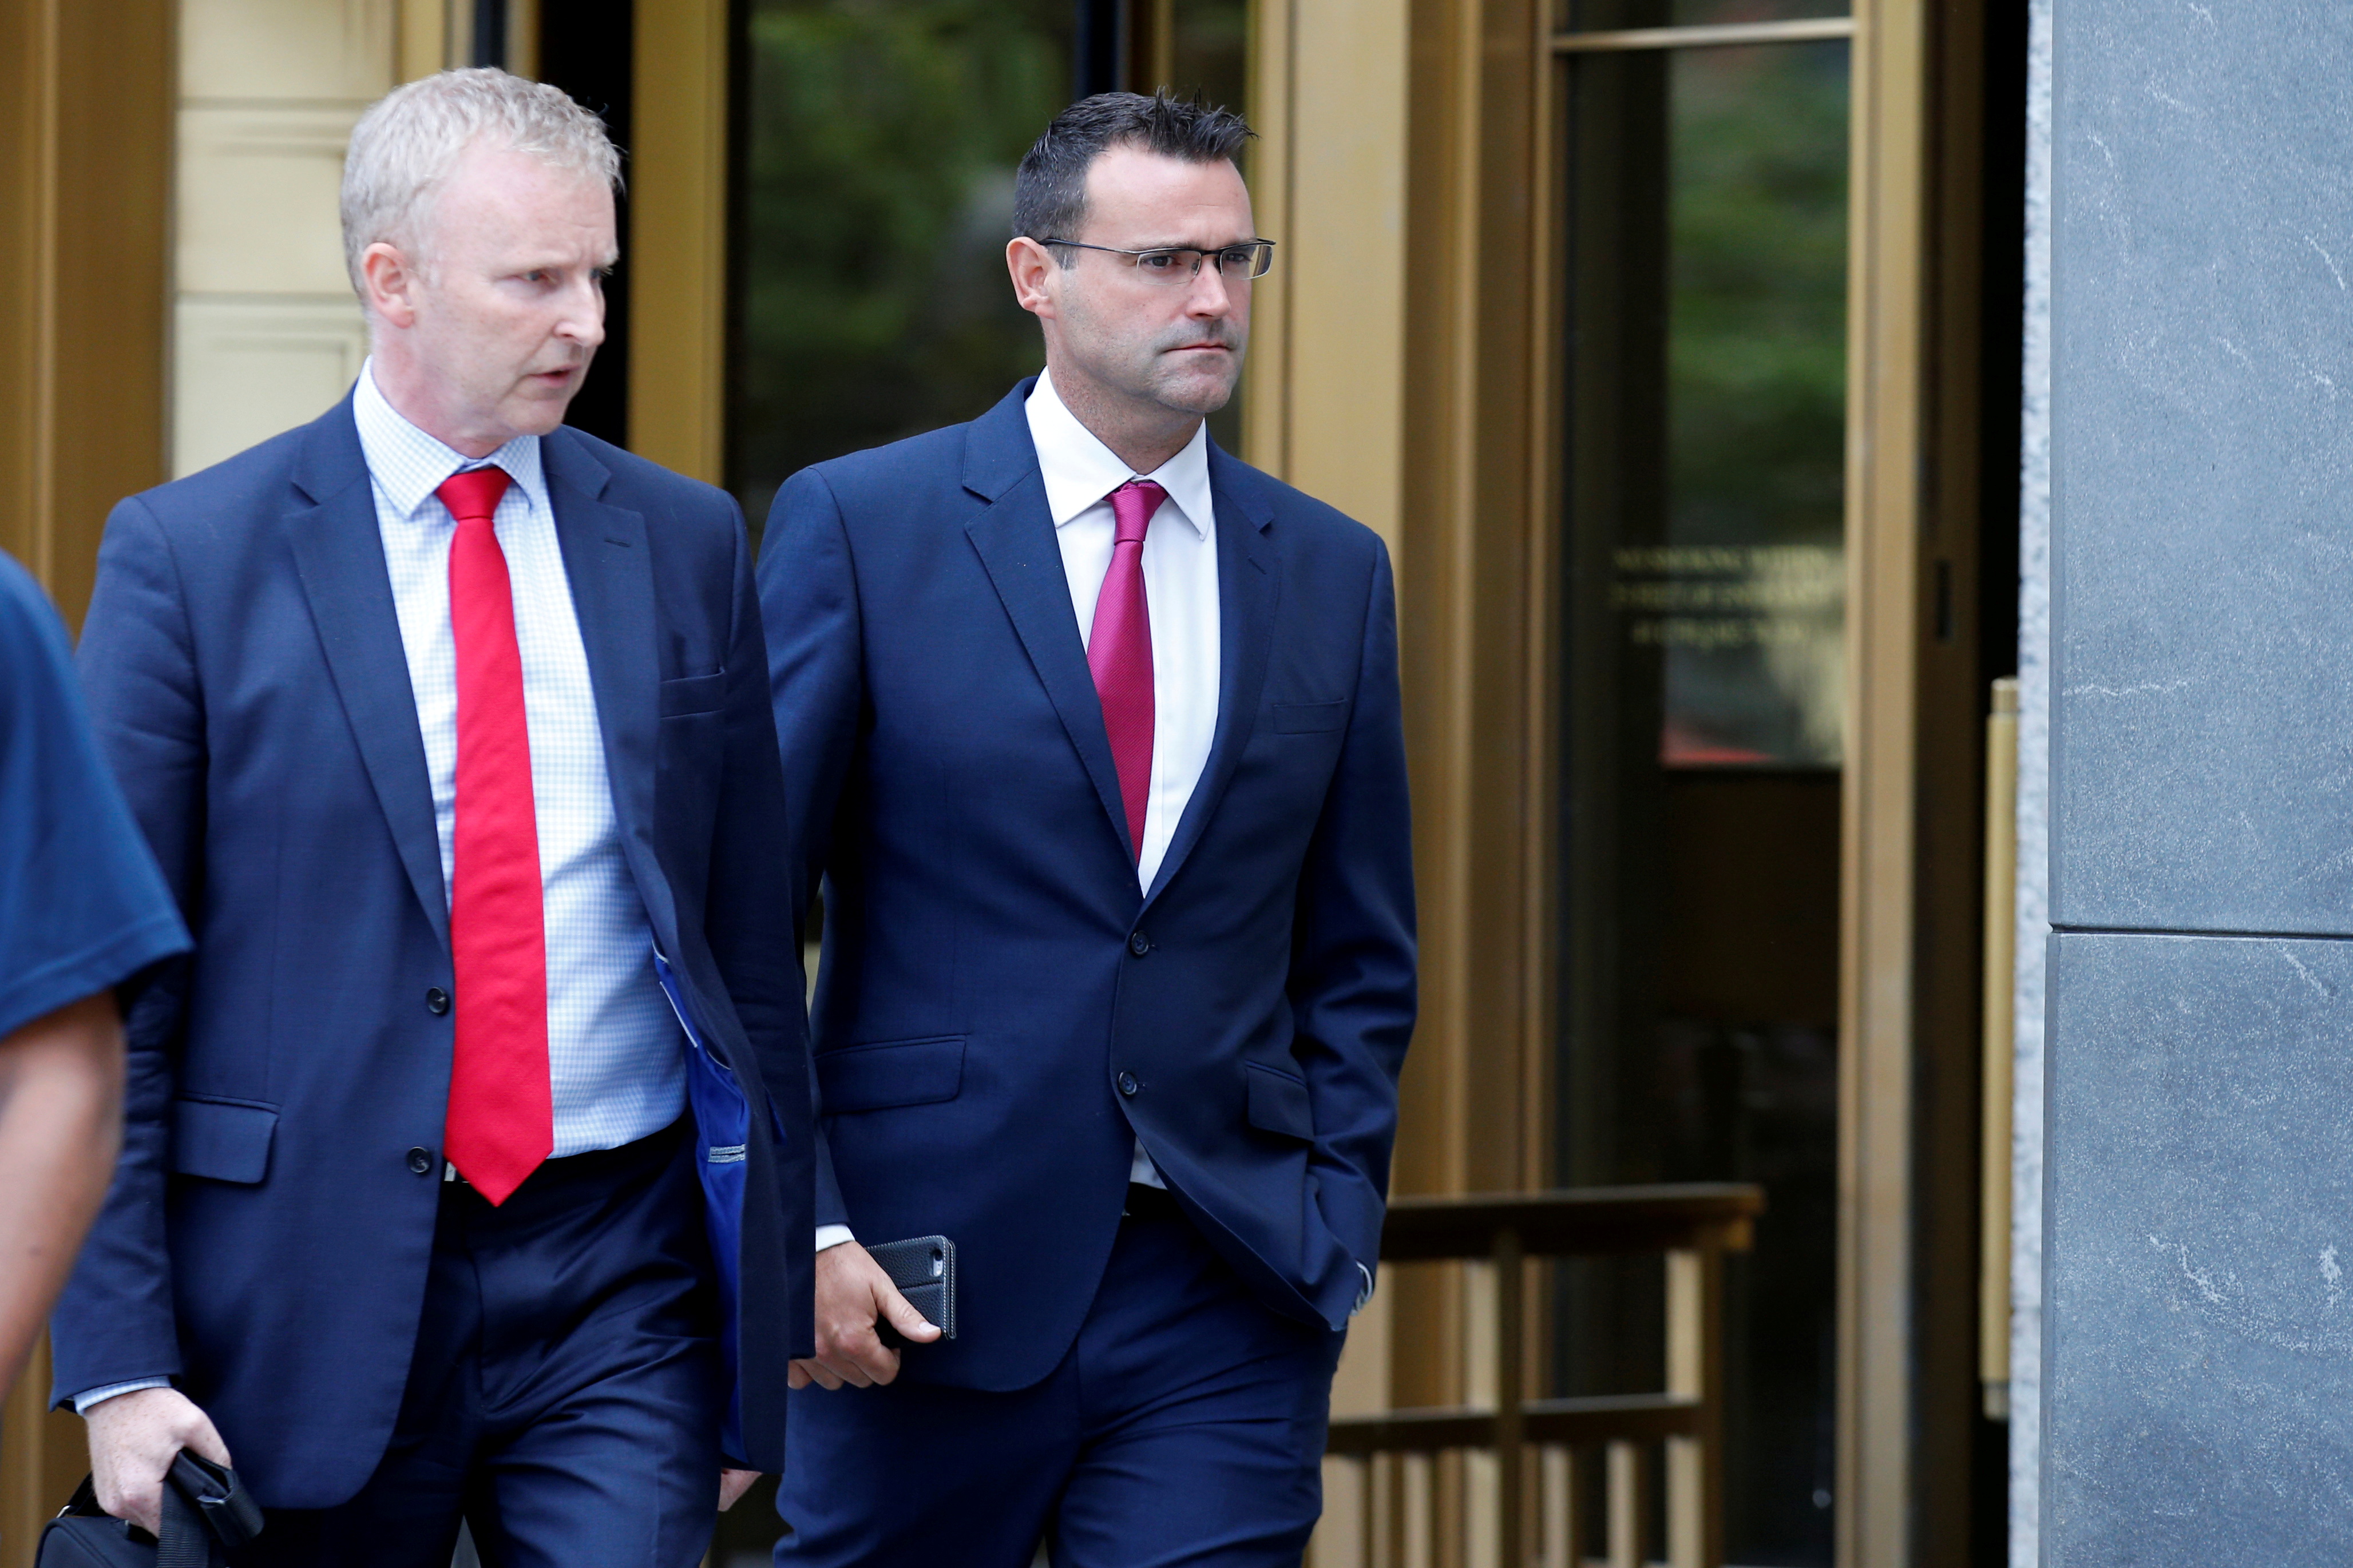 File photo: Richard Usher (right), former London-based trader for JPMorgan Chase & Co, exits the U.S. Federal Court in Manhattan following a hearing for conspiring to rig prices in the foreign exchange market in New York City. REUTERS/Brendan McDermid